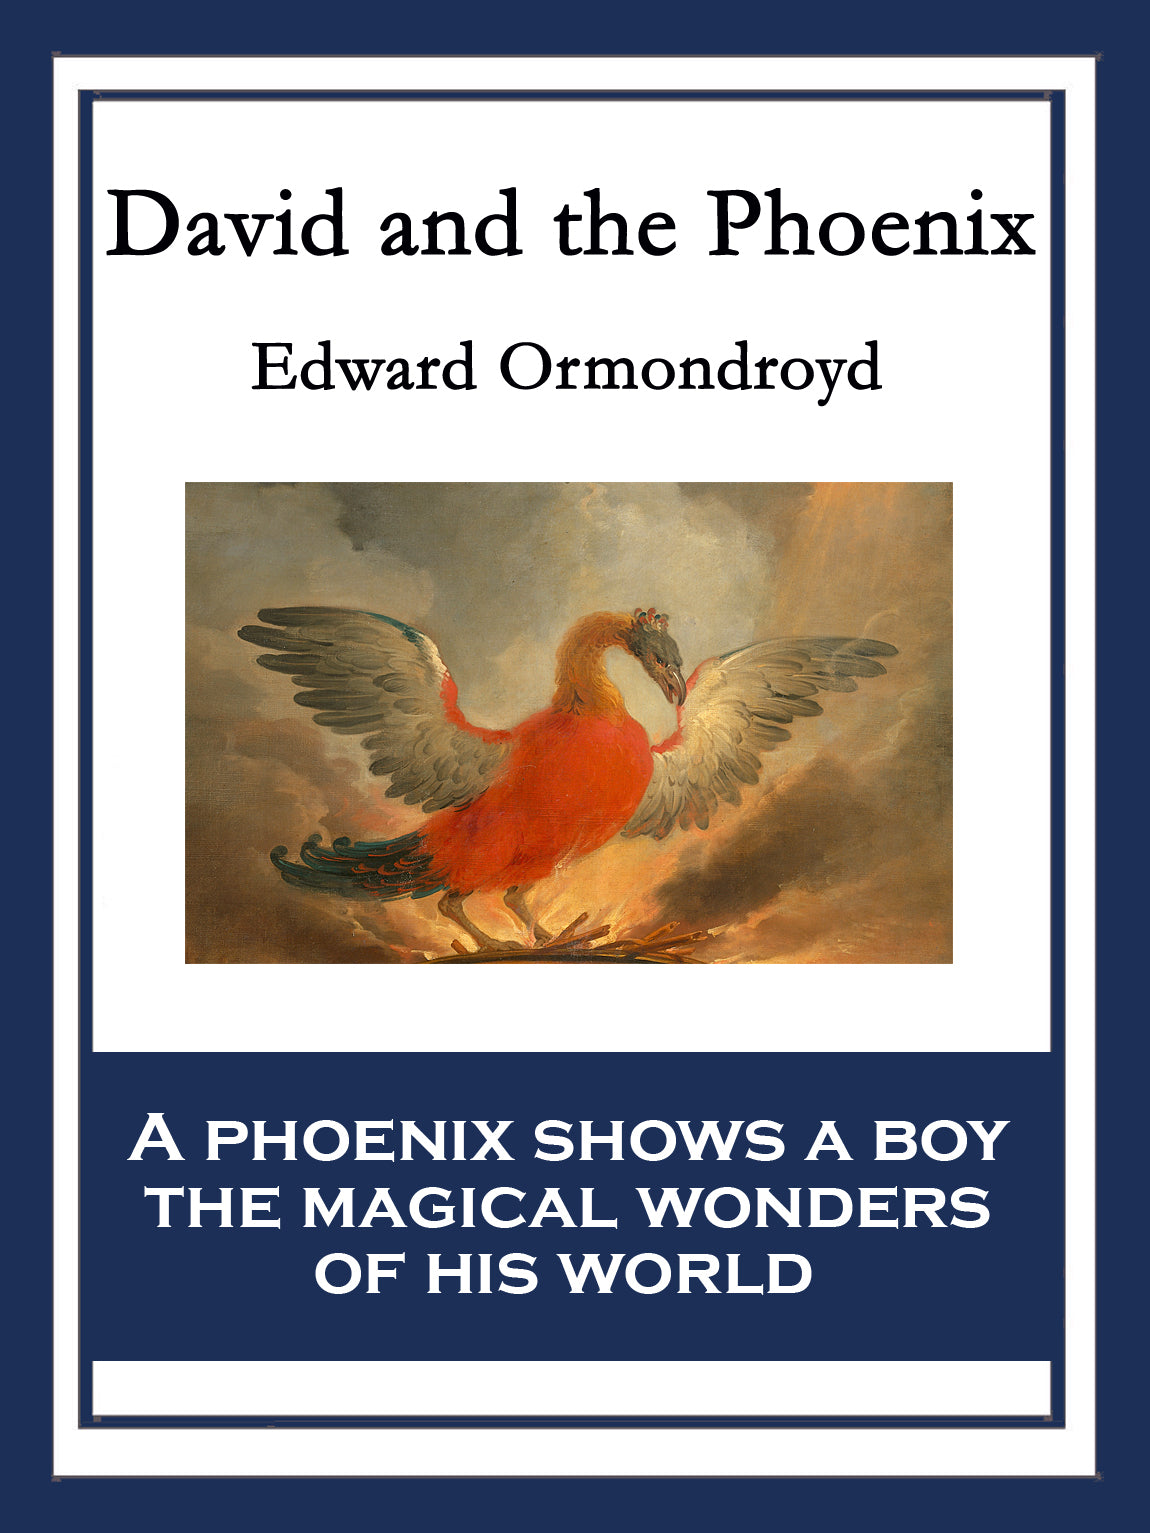 Cover art for David and the Phoenix.